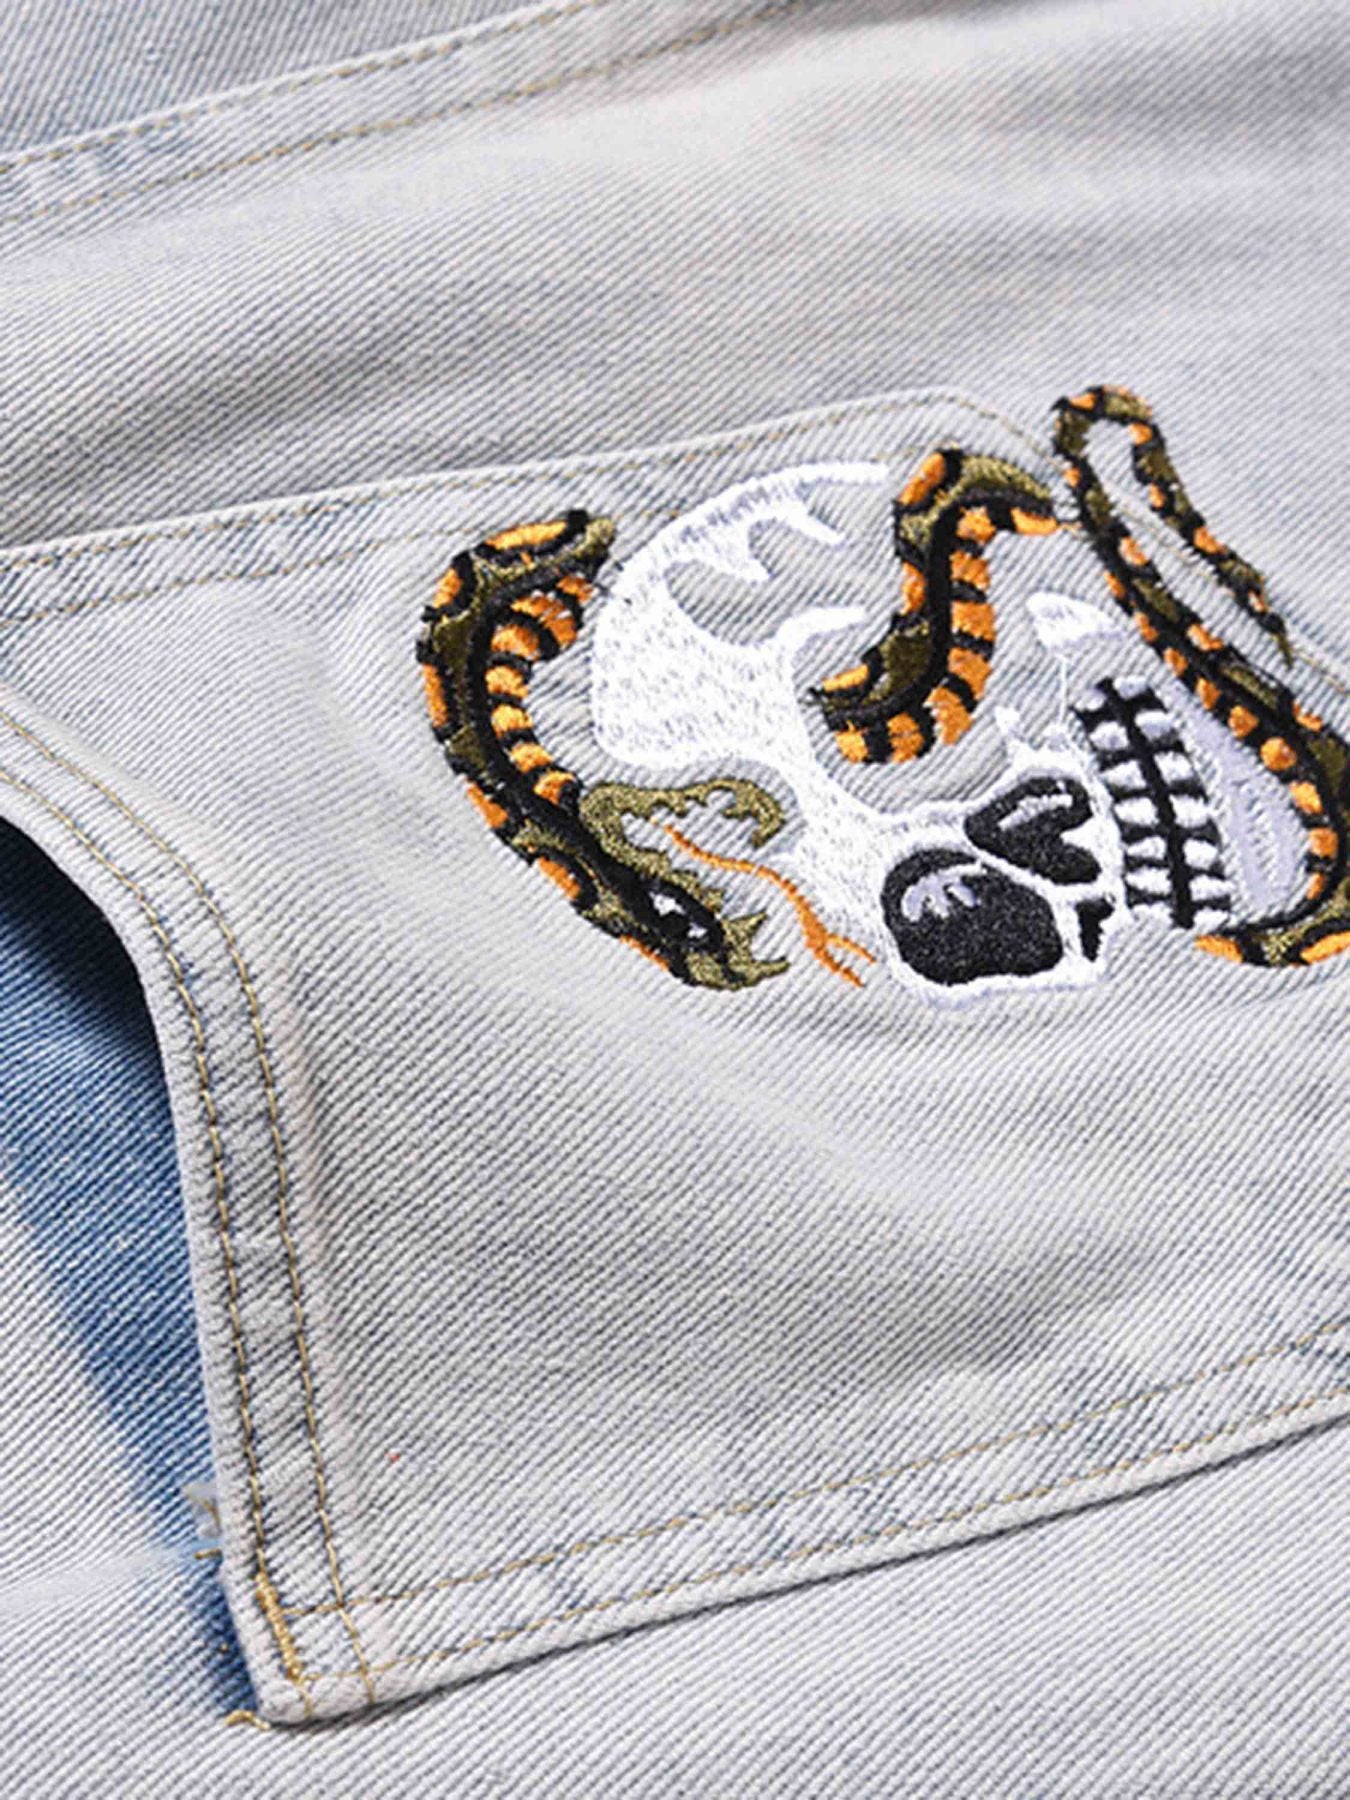 The Supermade Skull Flame Monogram Embroidered Slim Fit Jeans